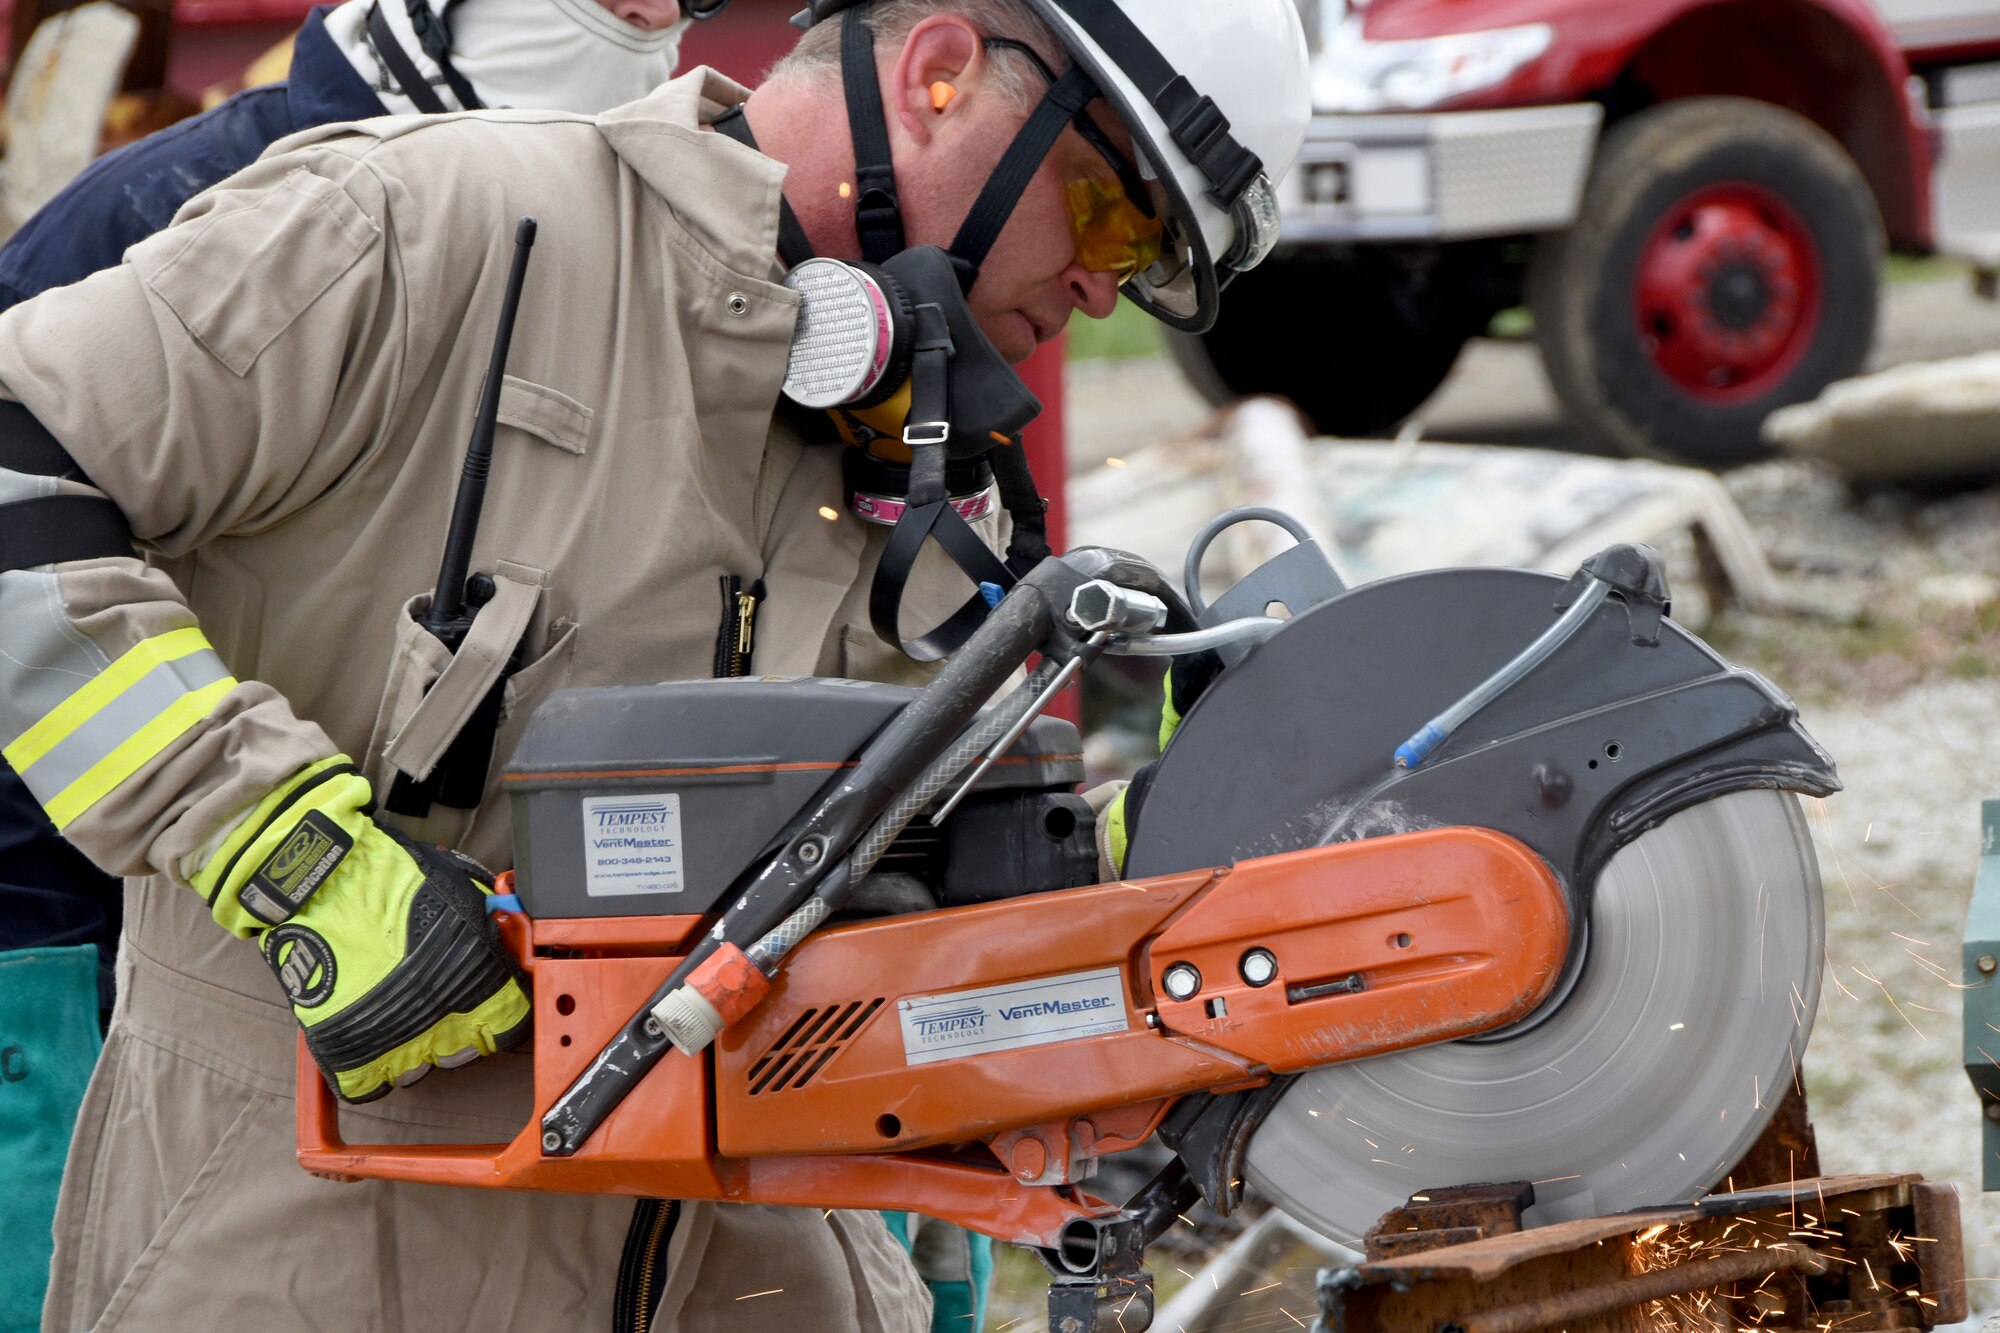 Tech. Sgt.Adam Long, firefighter with the 178th Wing, Springfield, Ohio Air National Guard, cuts a metal grate with a 14 rescue saw to gain access to simulated collapsed building after an earthquake at Muscatatuck Urban Training Center, Butlerville, Ind. April 9.
More than 150 Airman participated in training to prepare them for potential deployments. U.S. Air National Guard photo by Senior Master Sgt. Joseph Stahl/released.